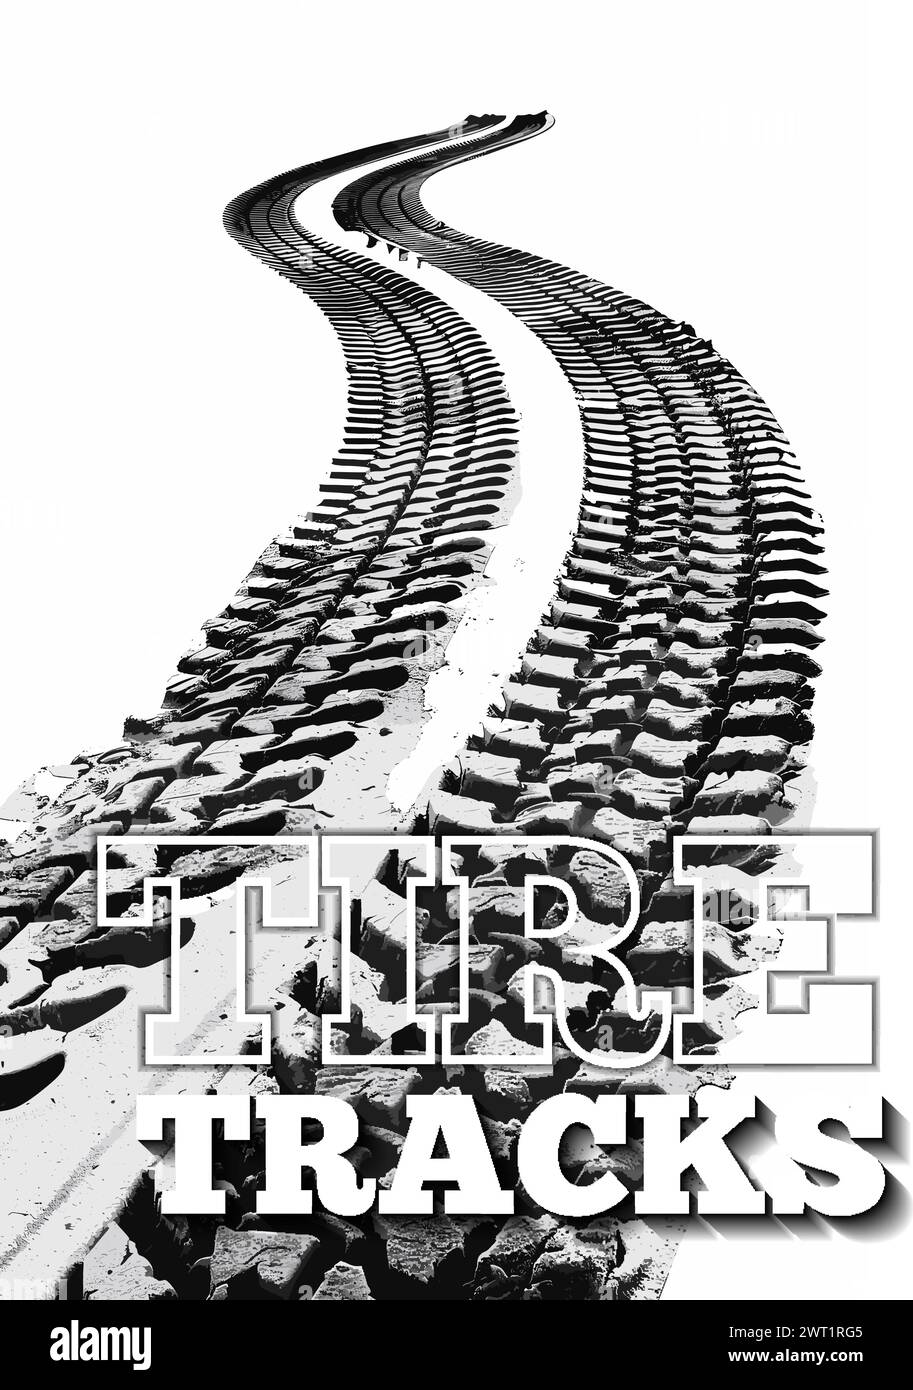 Tire tracks vector illustration isolated on white background Stock Vector